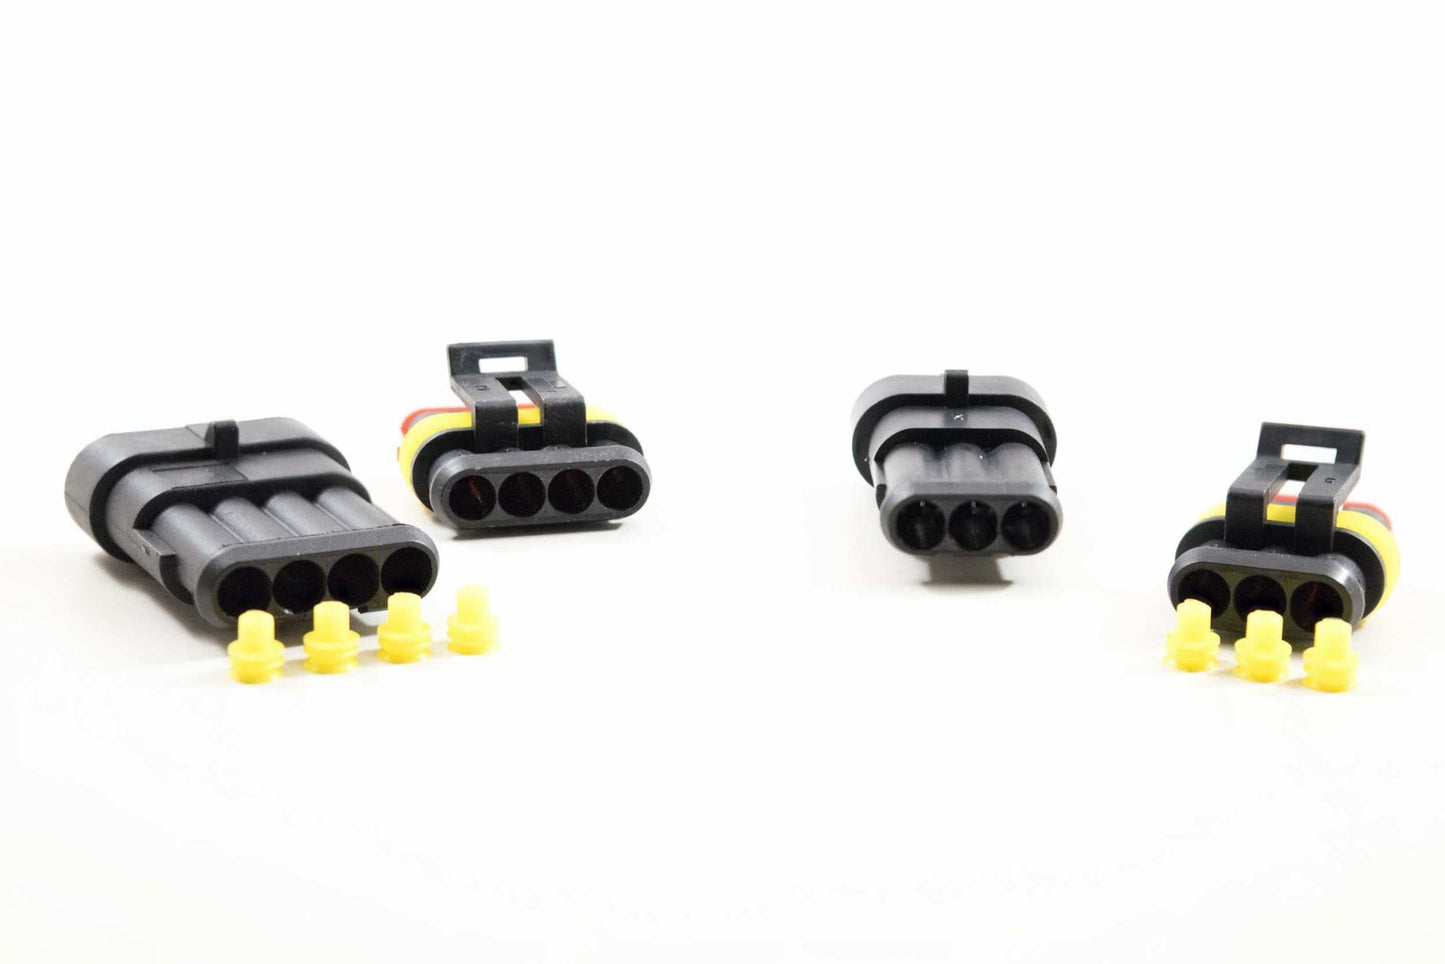 Connector: AMP Female - 3 pin